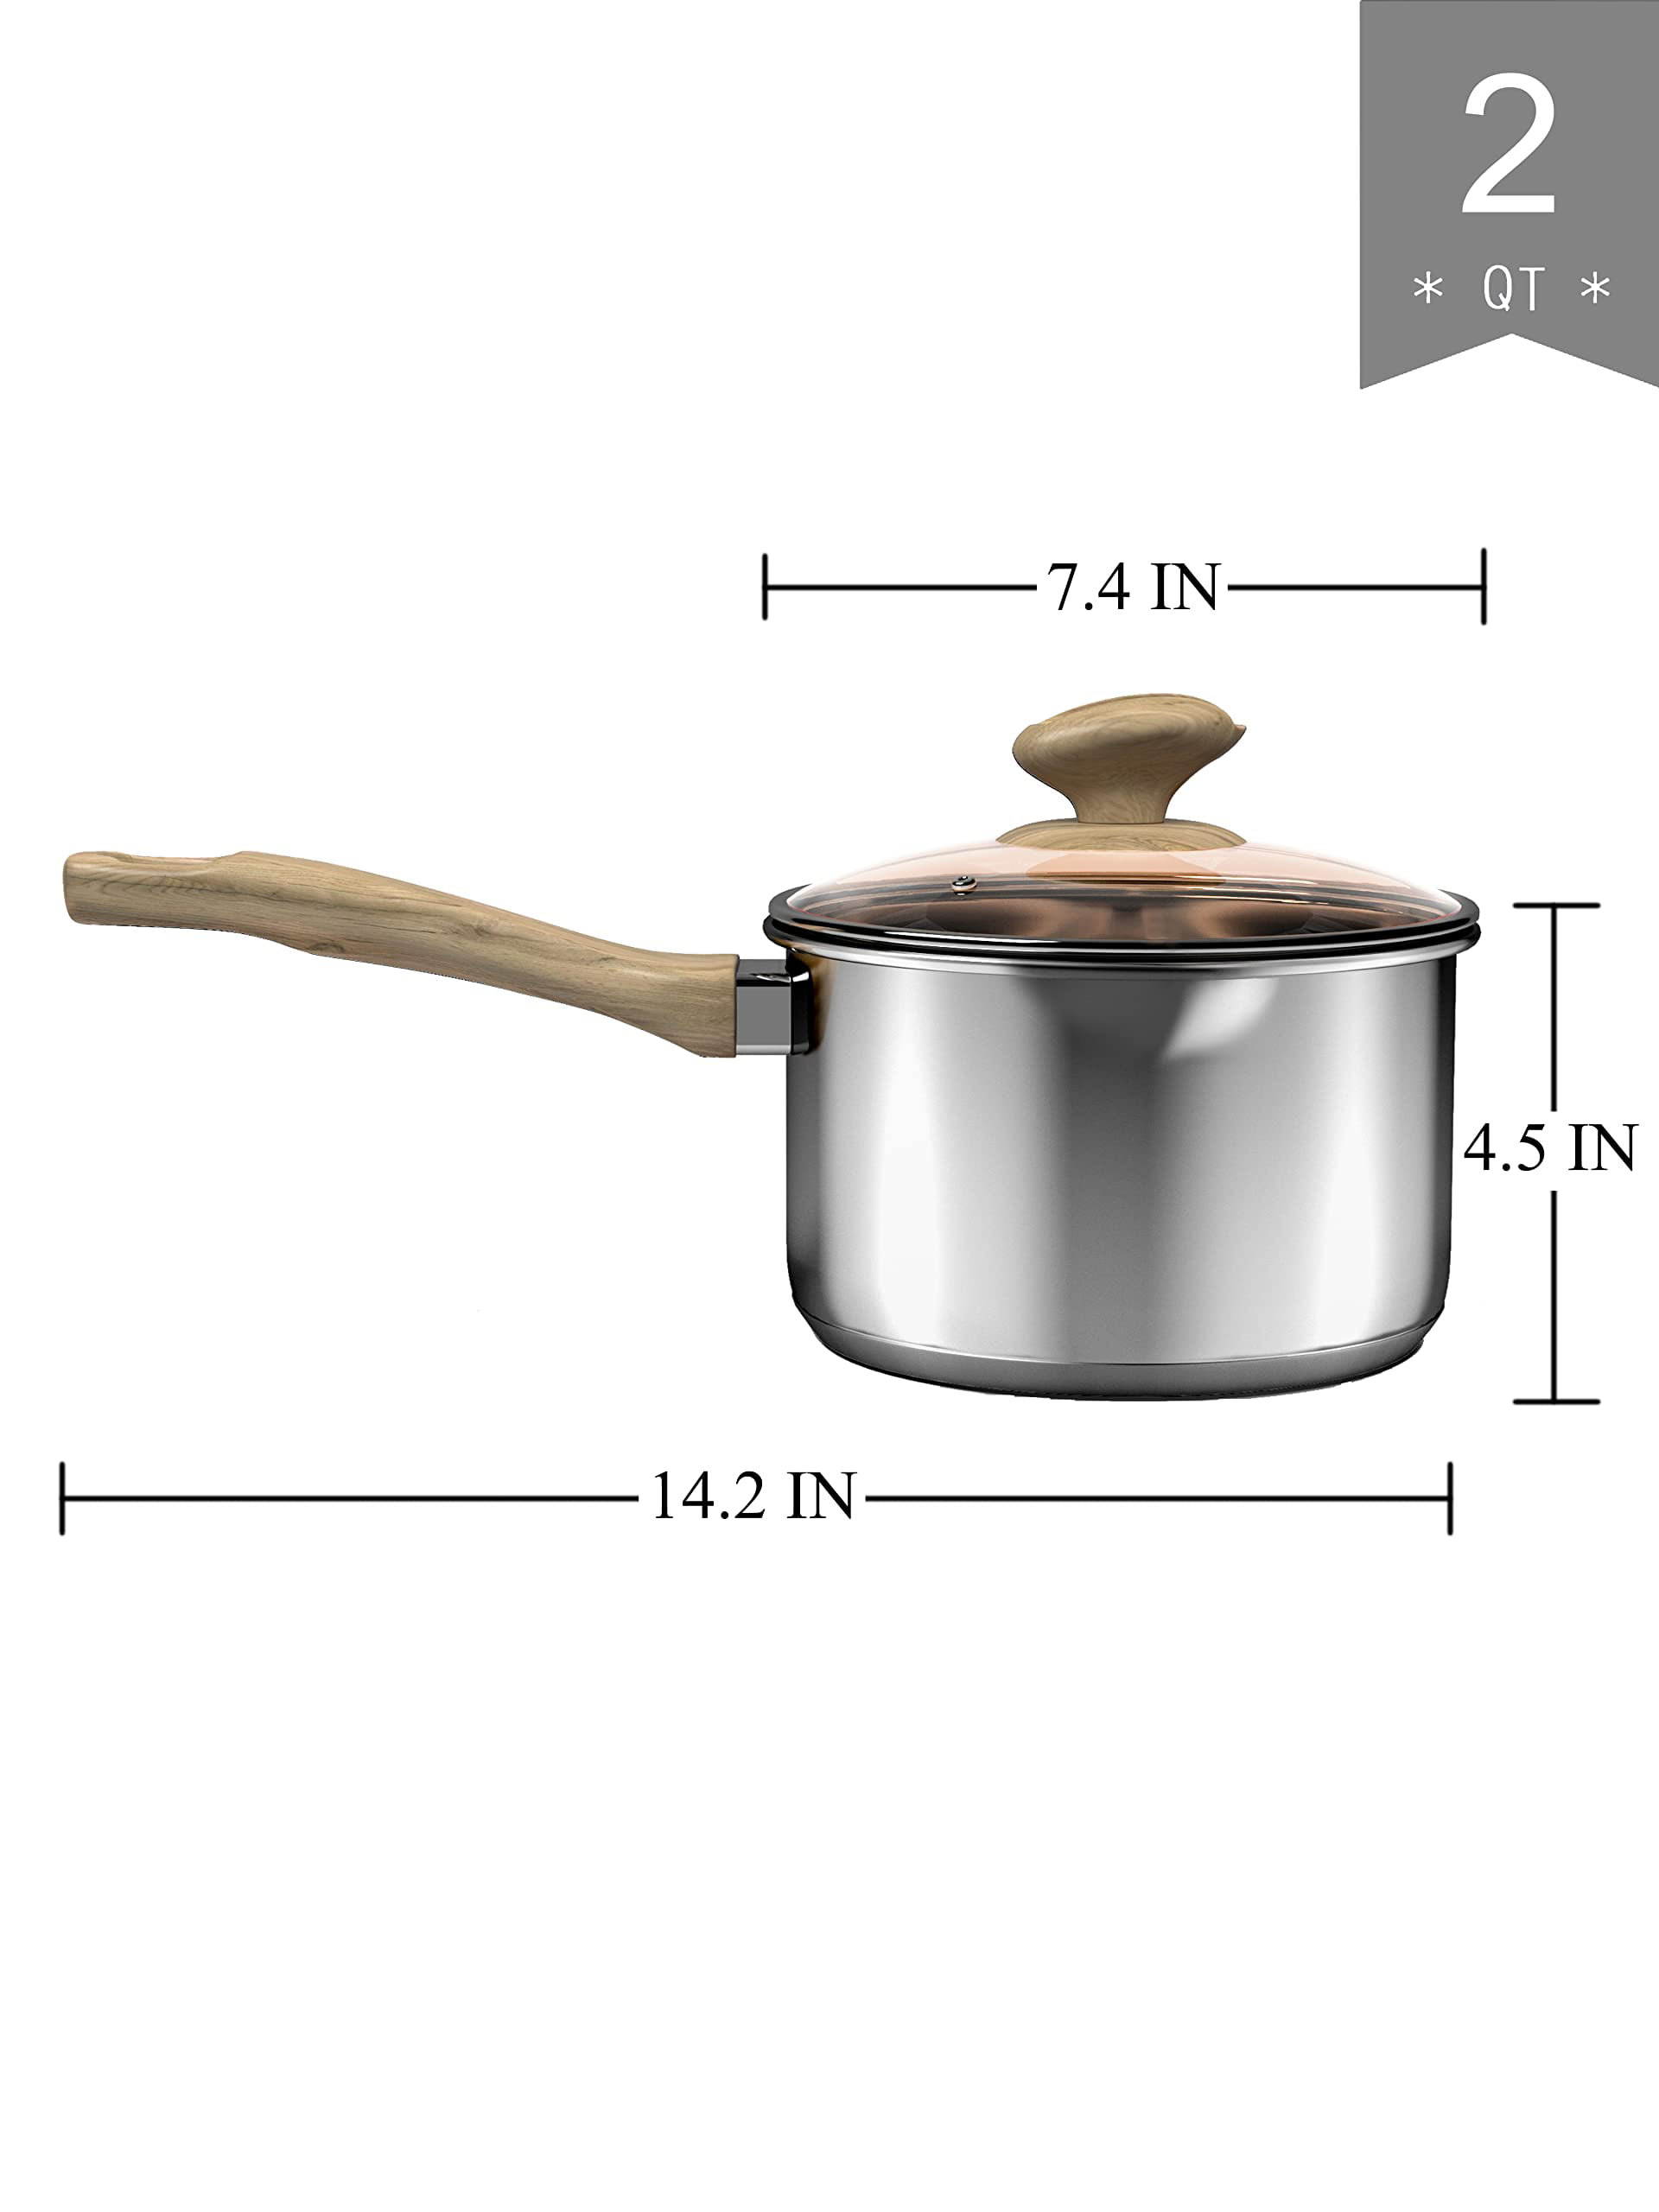  1.5 Quart Stainless Steel Saucepan with Pour Spout, Saucepan  with Glass Lid, 6 cups Burner Pot with Spout - for Boiling Milk, Sauce,  Gravies, Noodles: Home & Kitchen